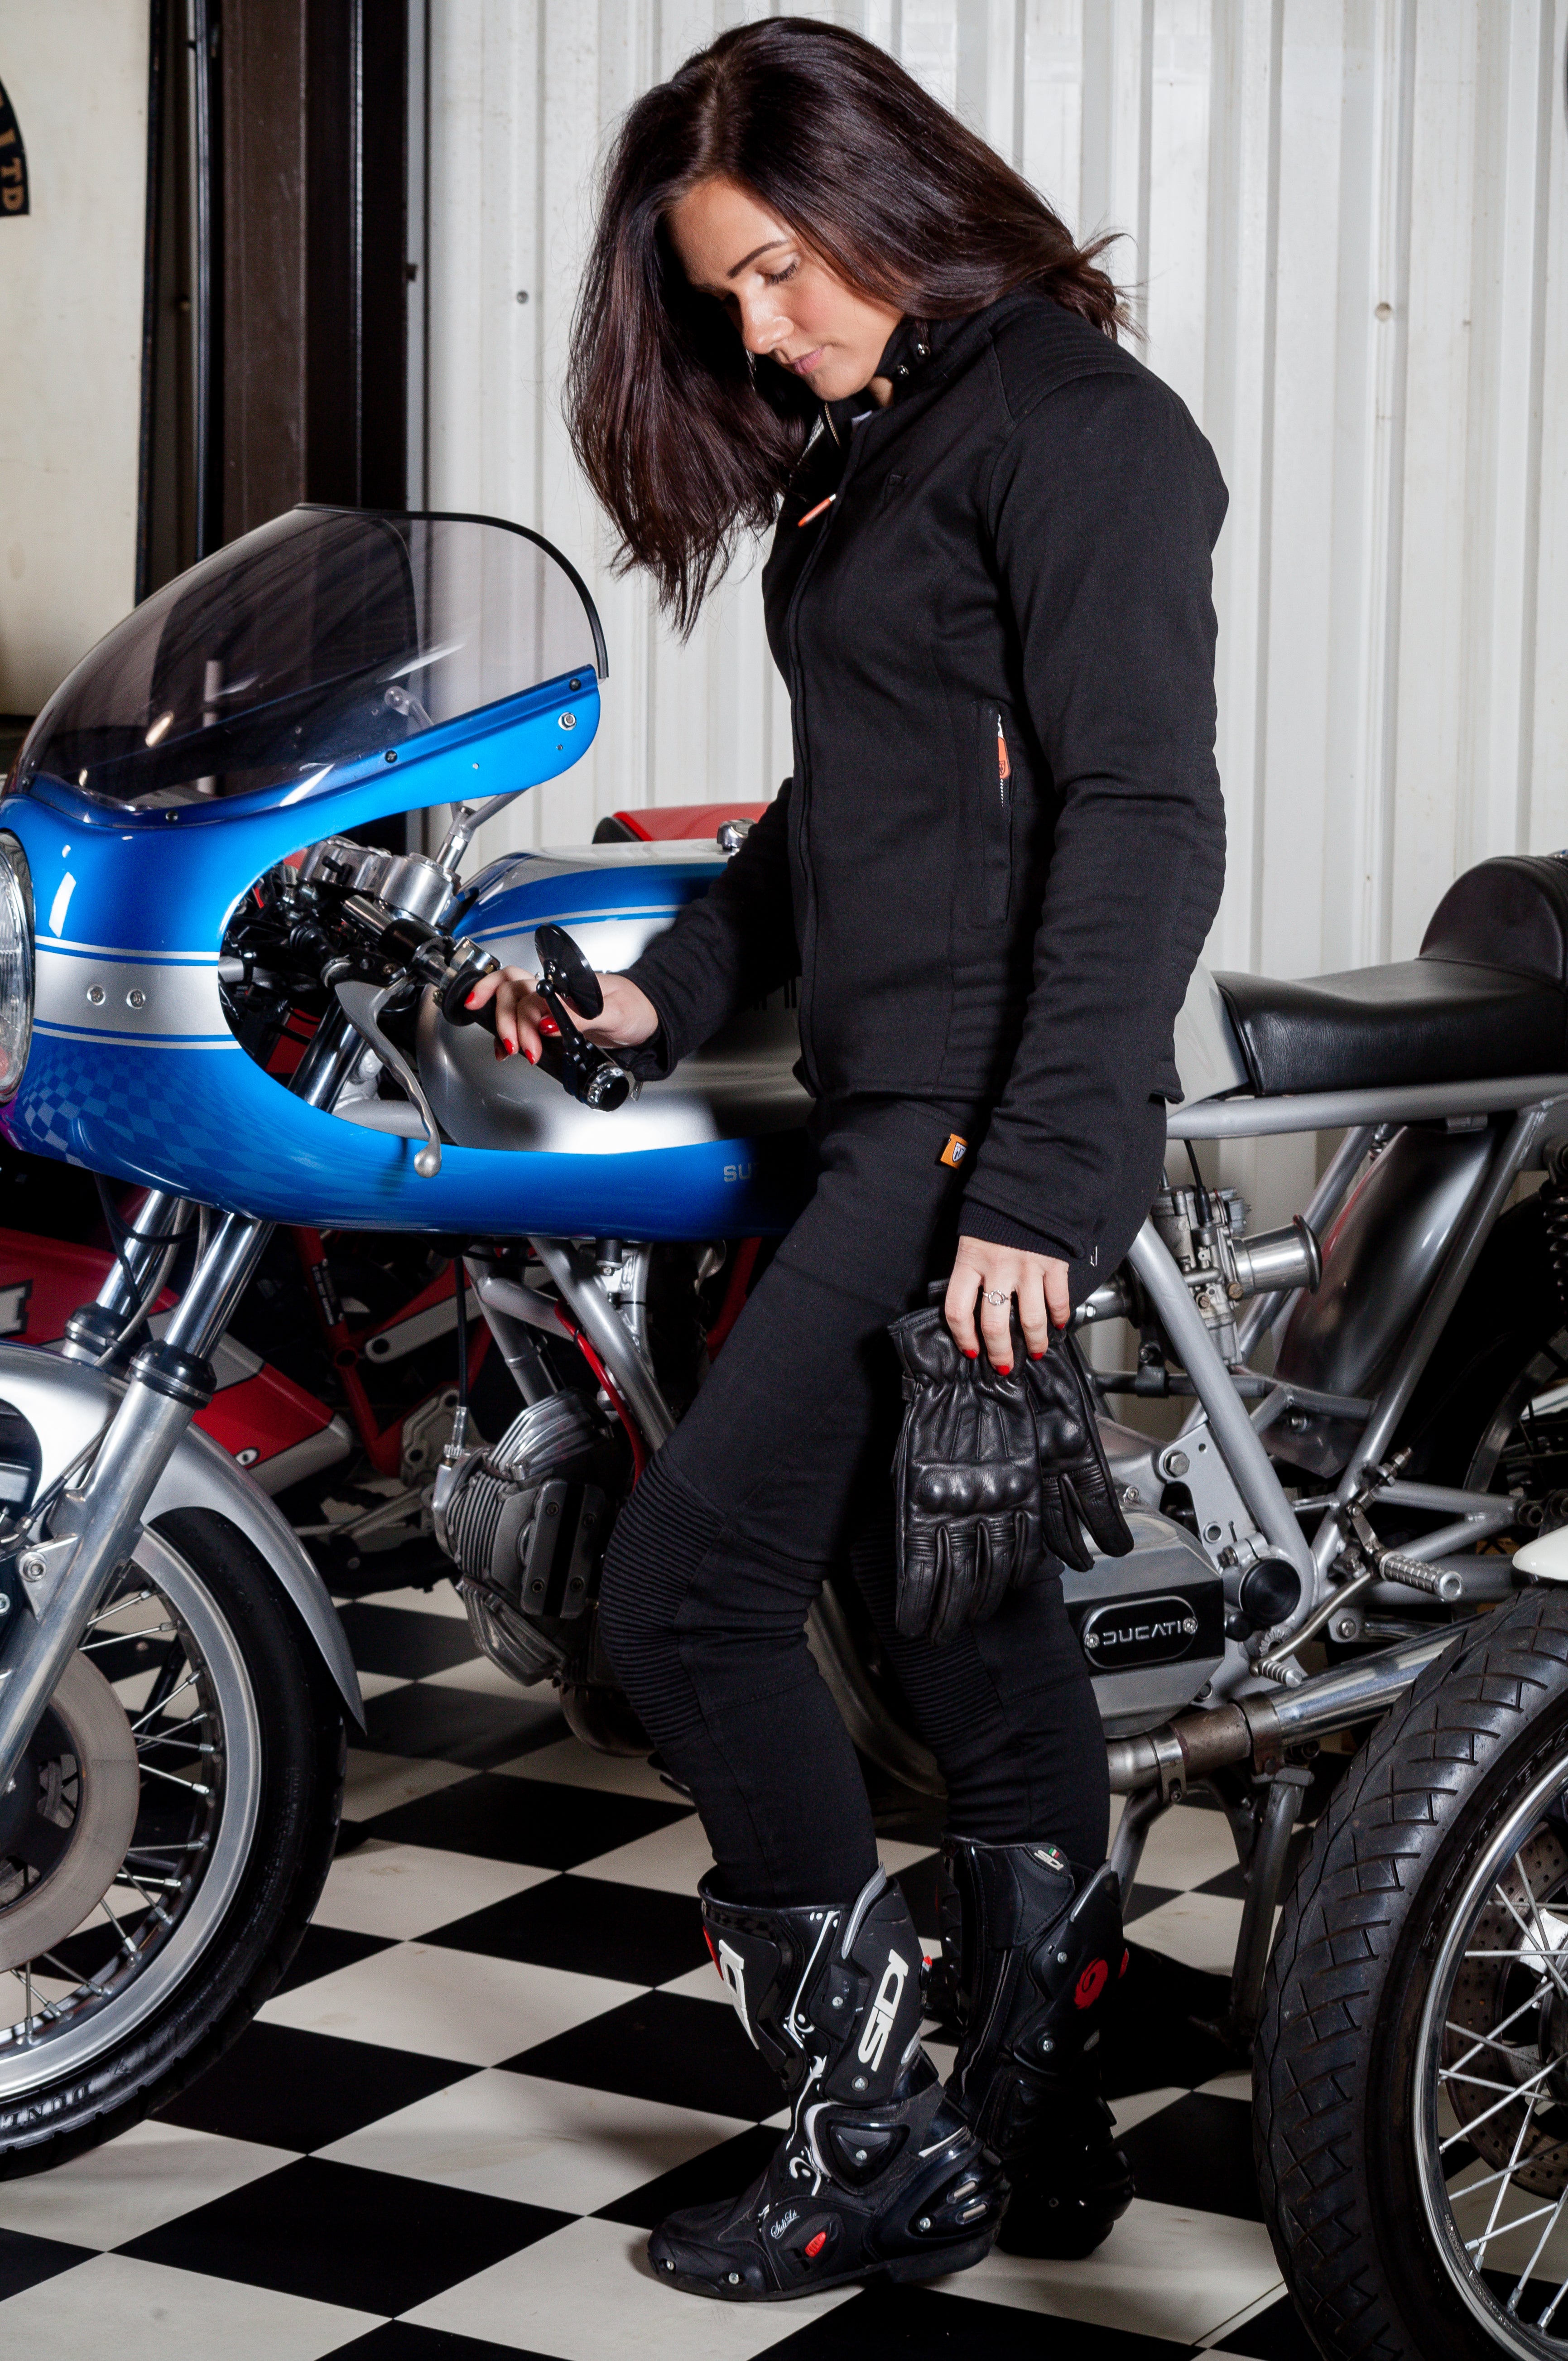 Zipped Front Motorcycle Leggings from MotoGirl – Moto Lounge